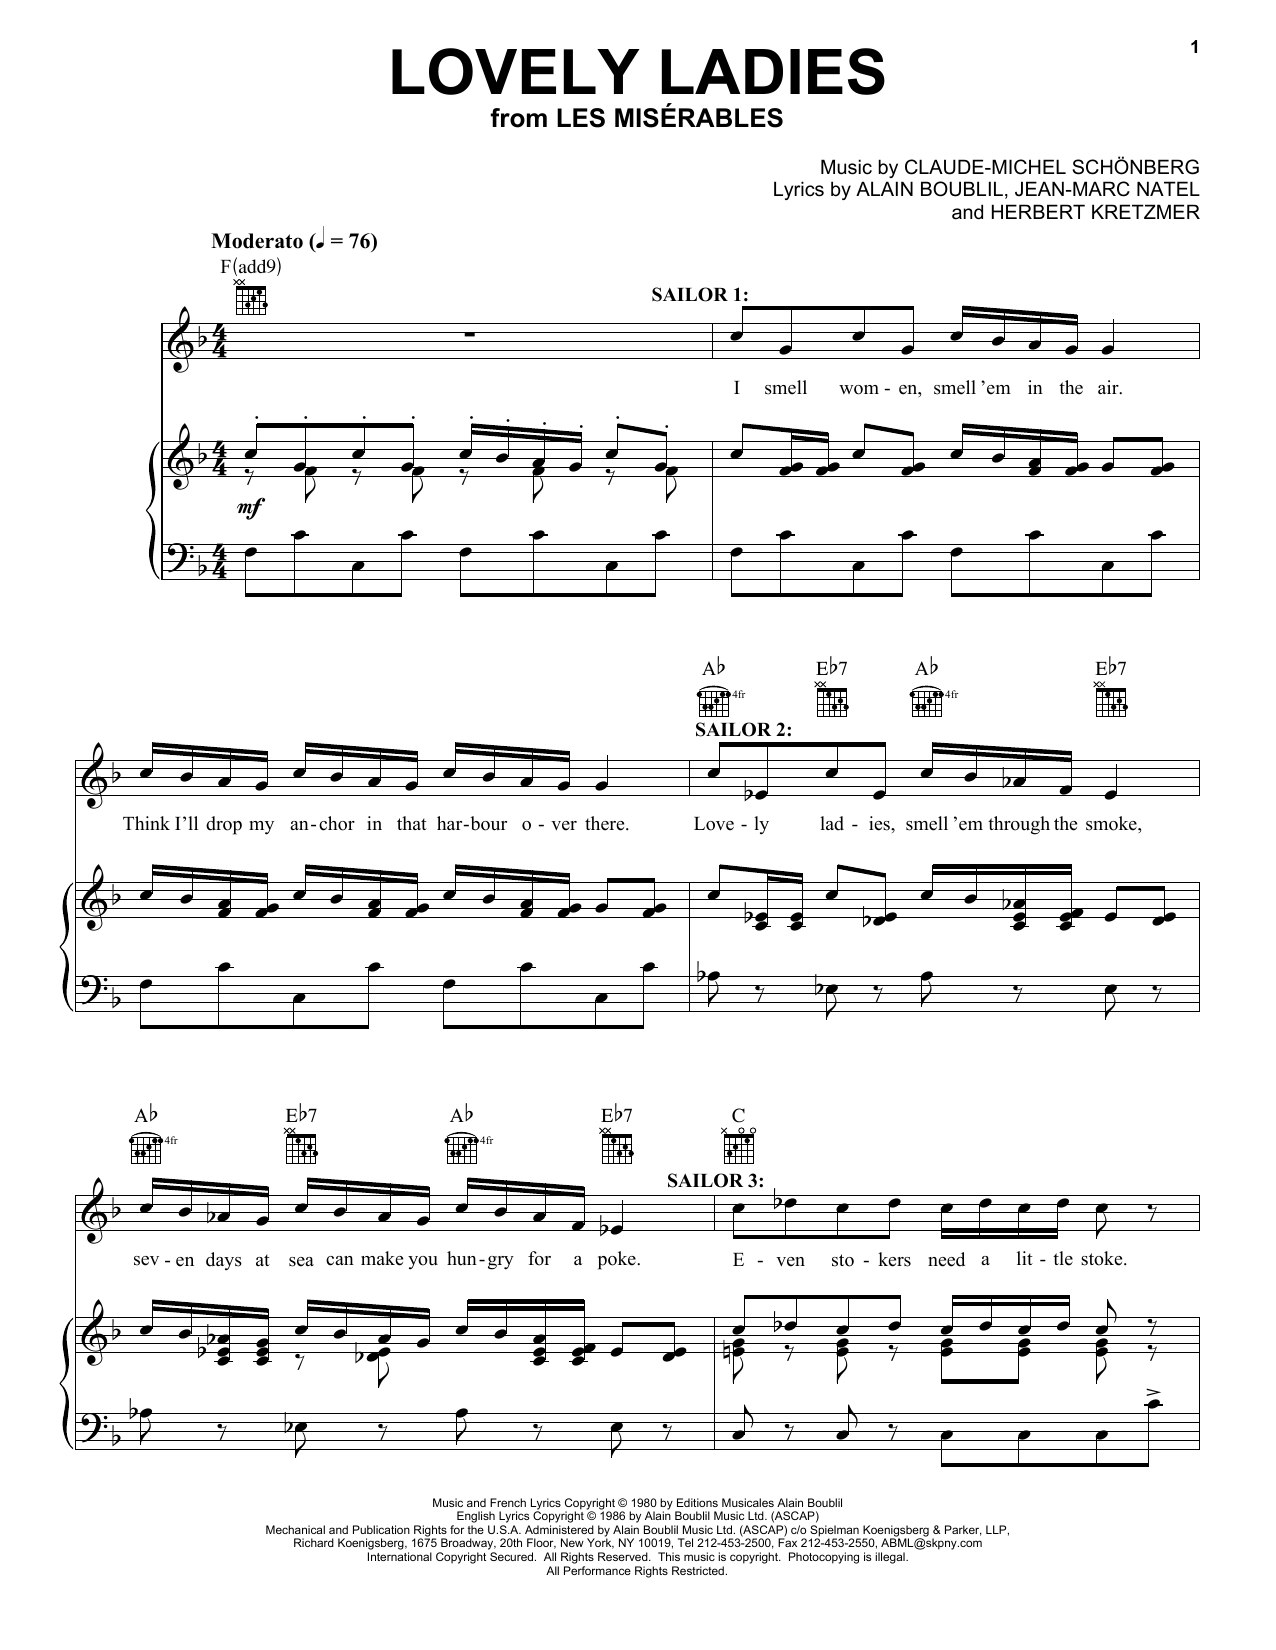 Alain Boublil Lovely Ladies sheet music notes and chords. Download Printable PDF.